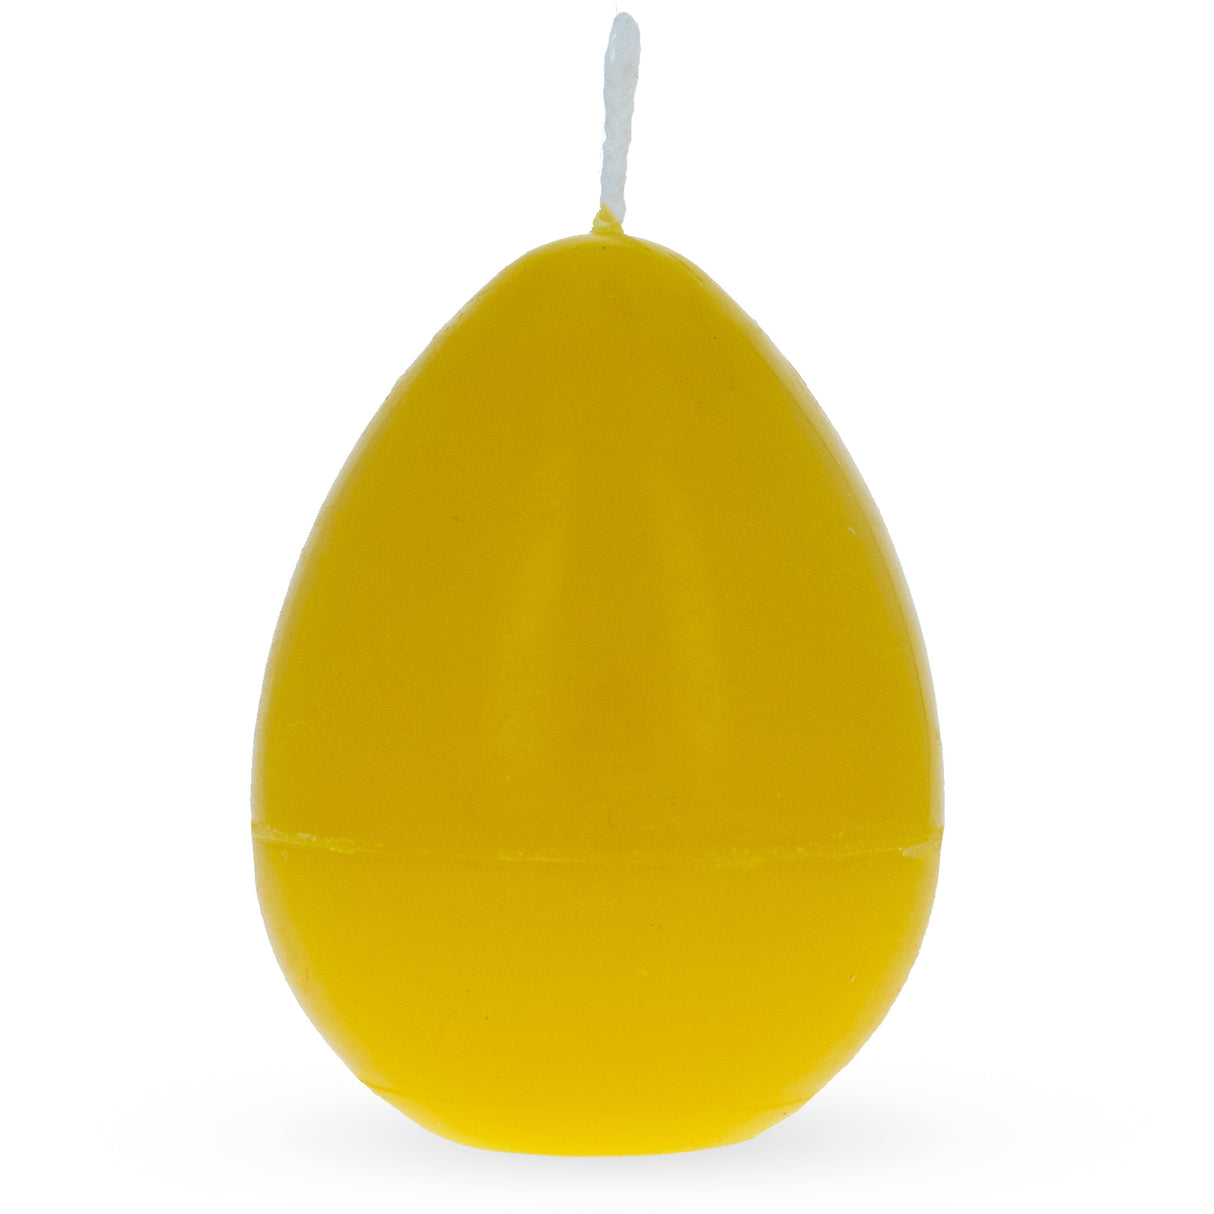 Egg-shaped 100% Pure Beeswax Handmade Candle Sweet Honey Smell 2.6 OZ in Yellow color, Oval shape